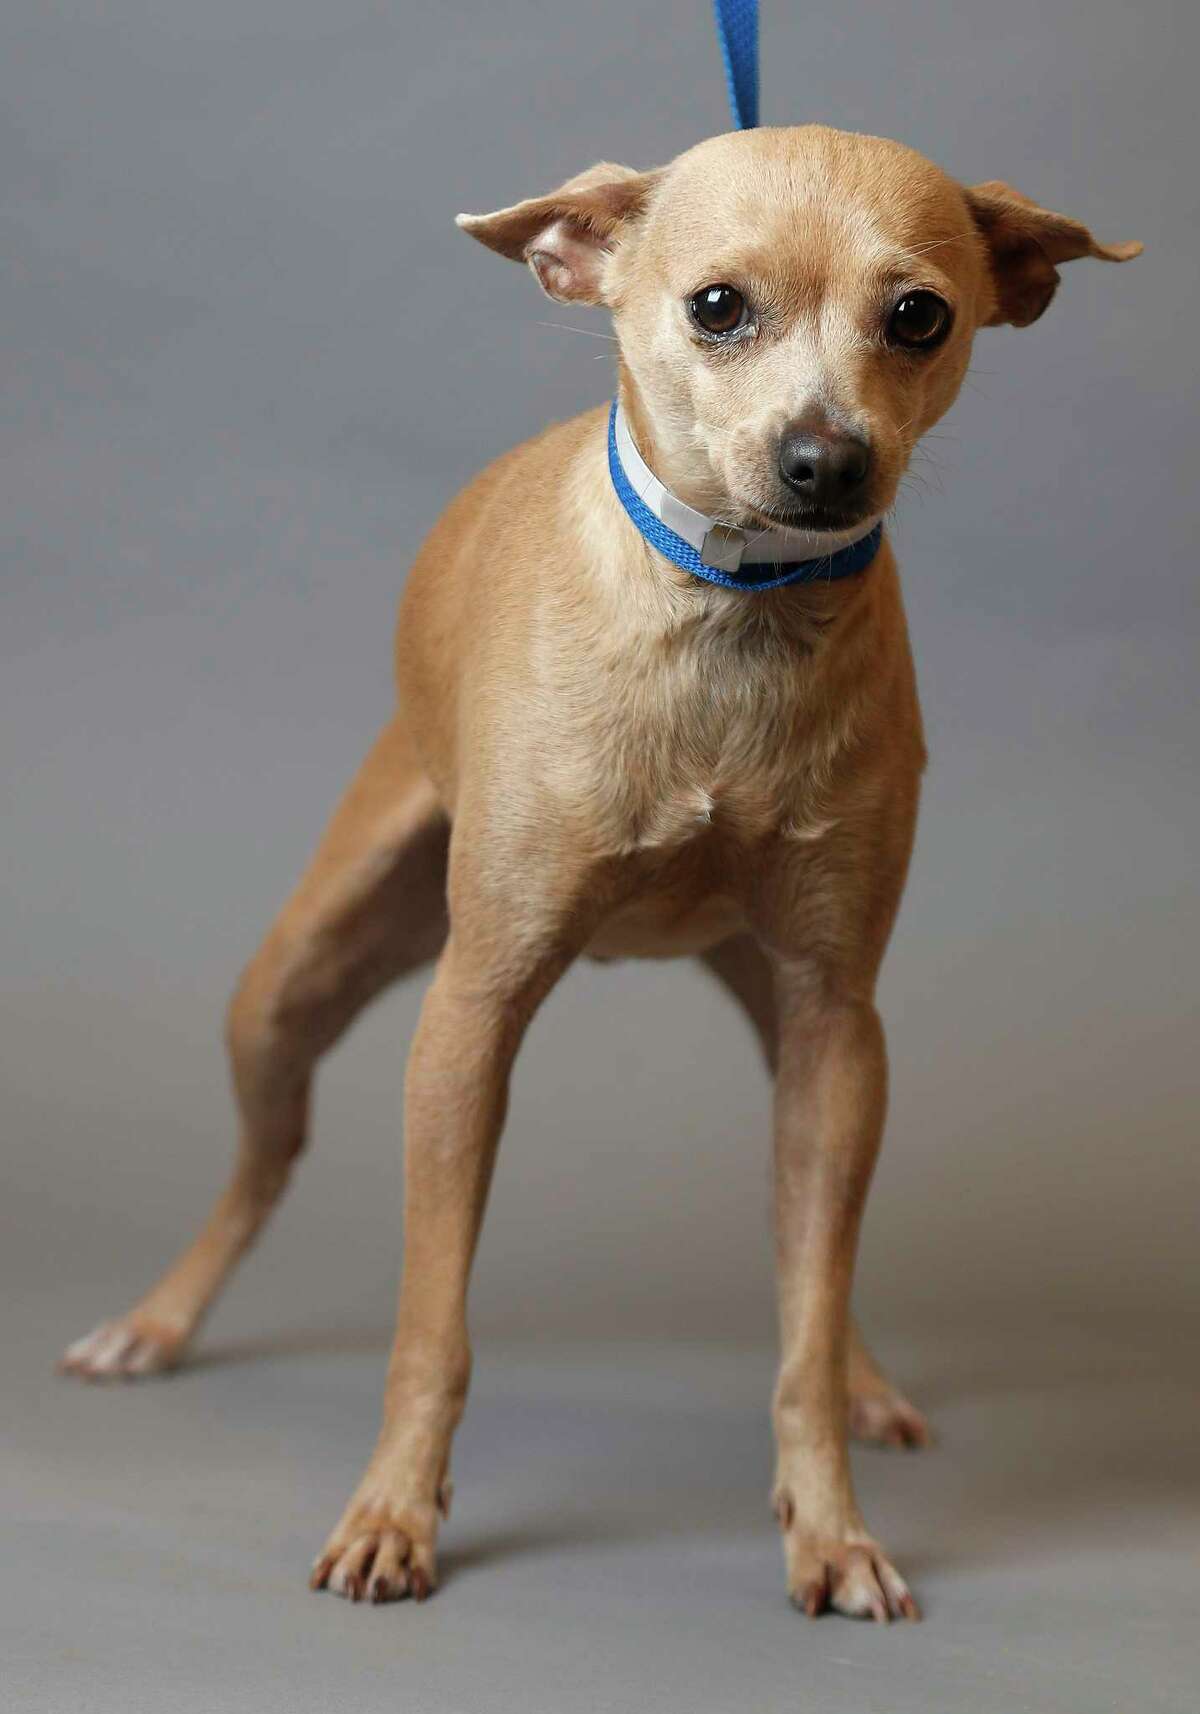 Guera is a 1 1/2-year-old, female, Chihuahua mix and is ready to be adopted from Houston SPCA. (Animal ID: 378168) Photographed Tuesday, Jan. 8, 2019, in Houston.